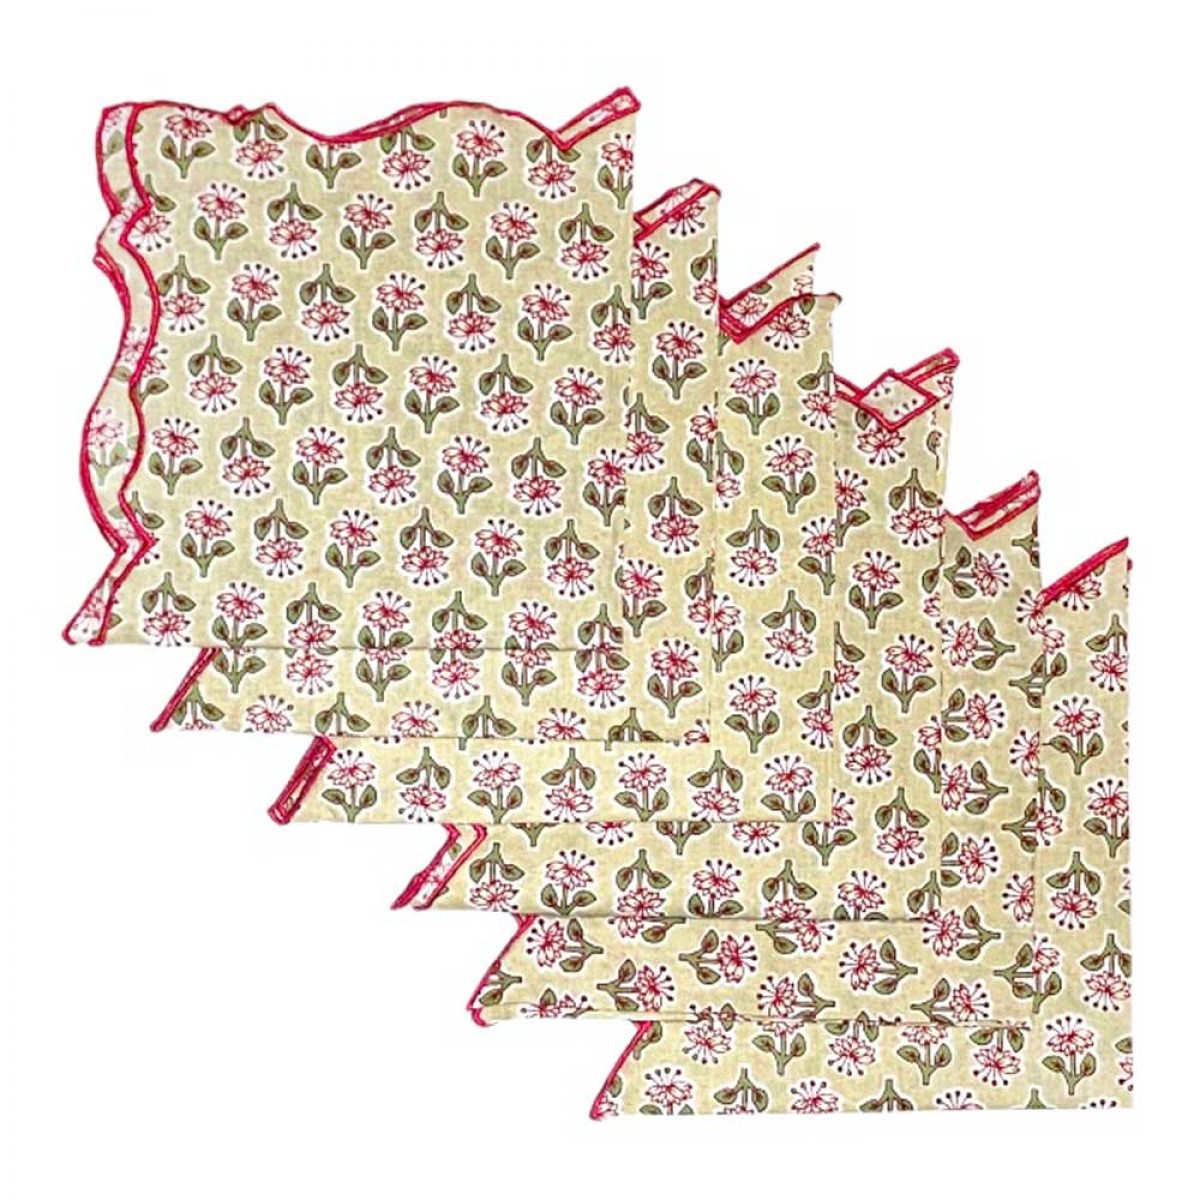 Cotton Scallop Embroidered Printed Napkin - Lily (Set of 6)